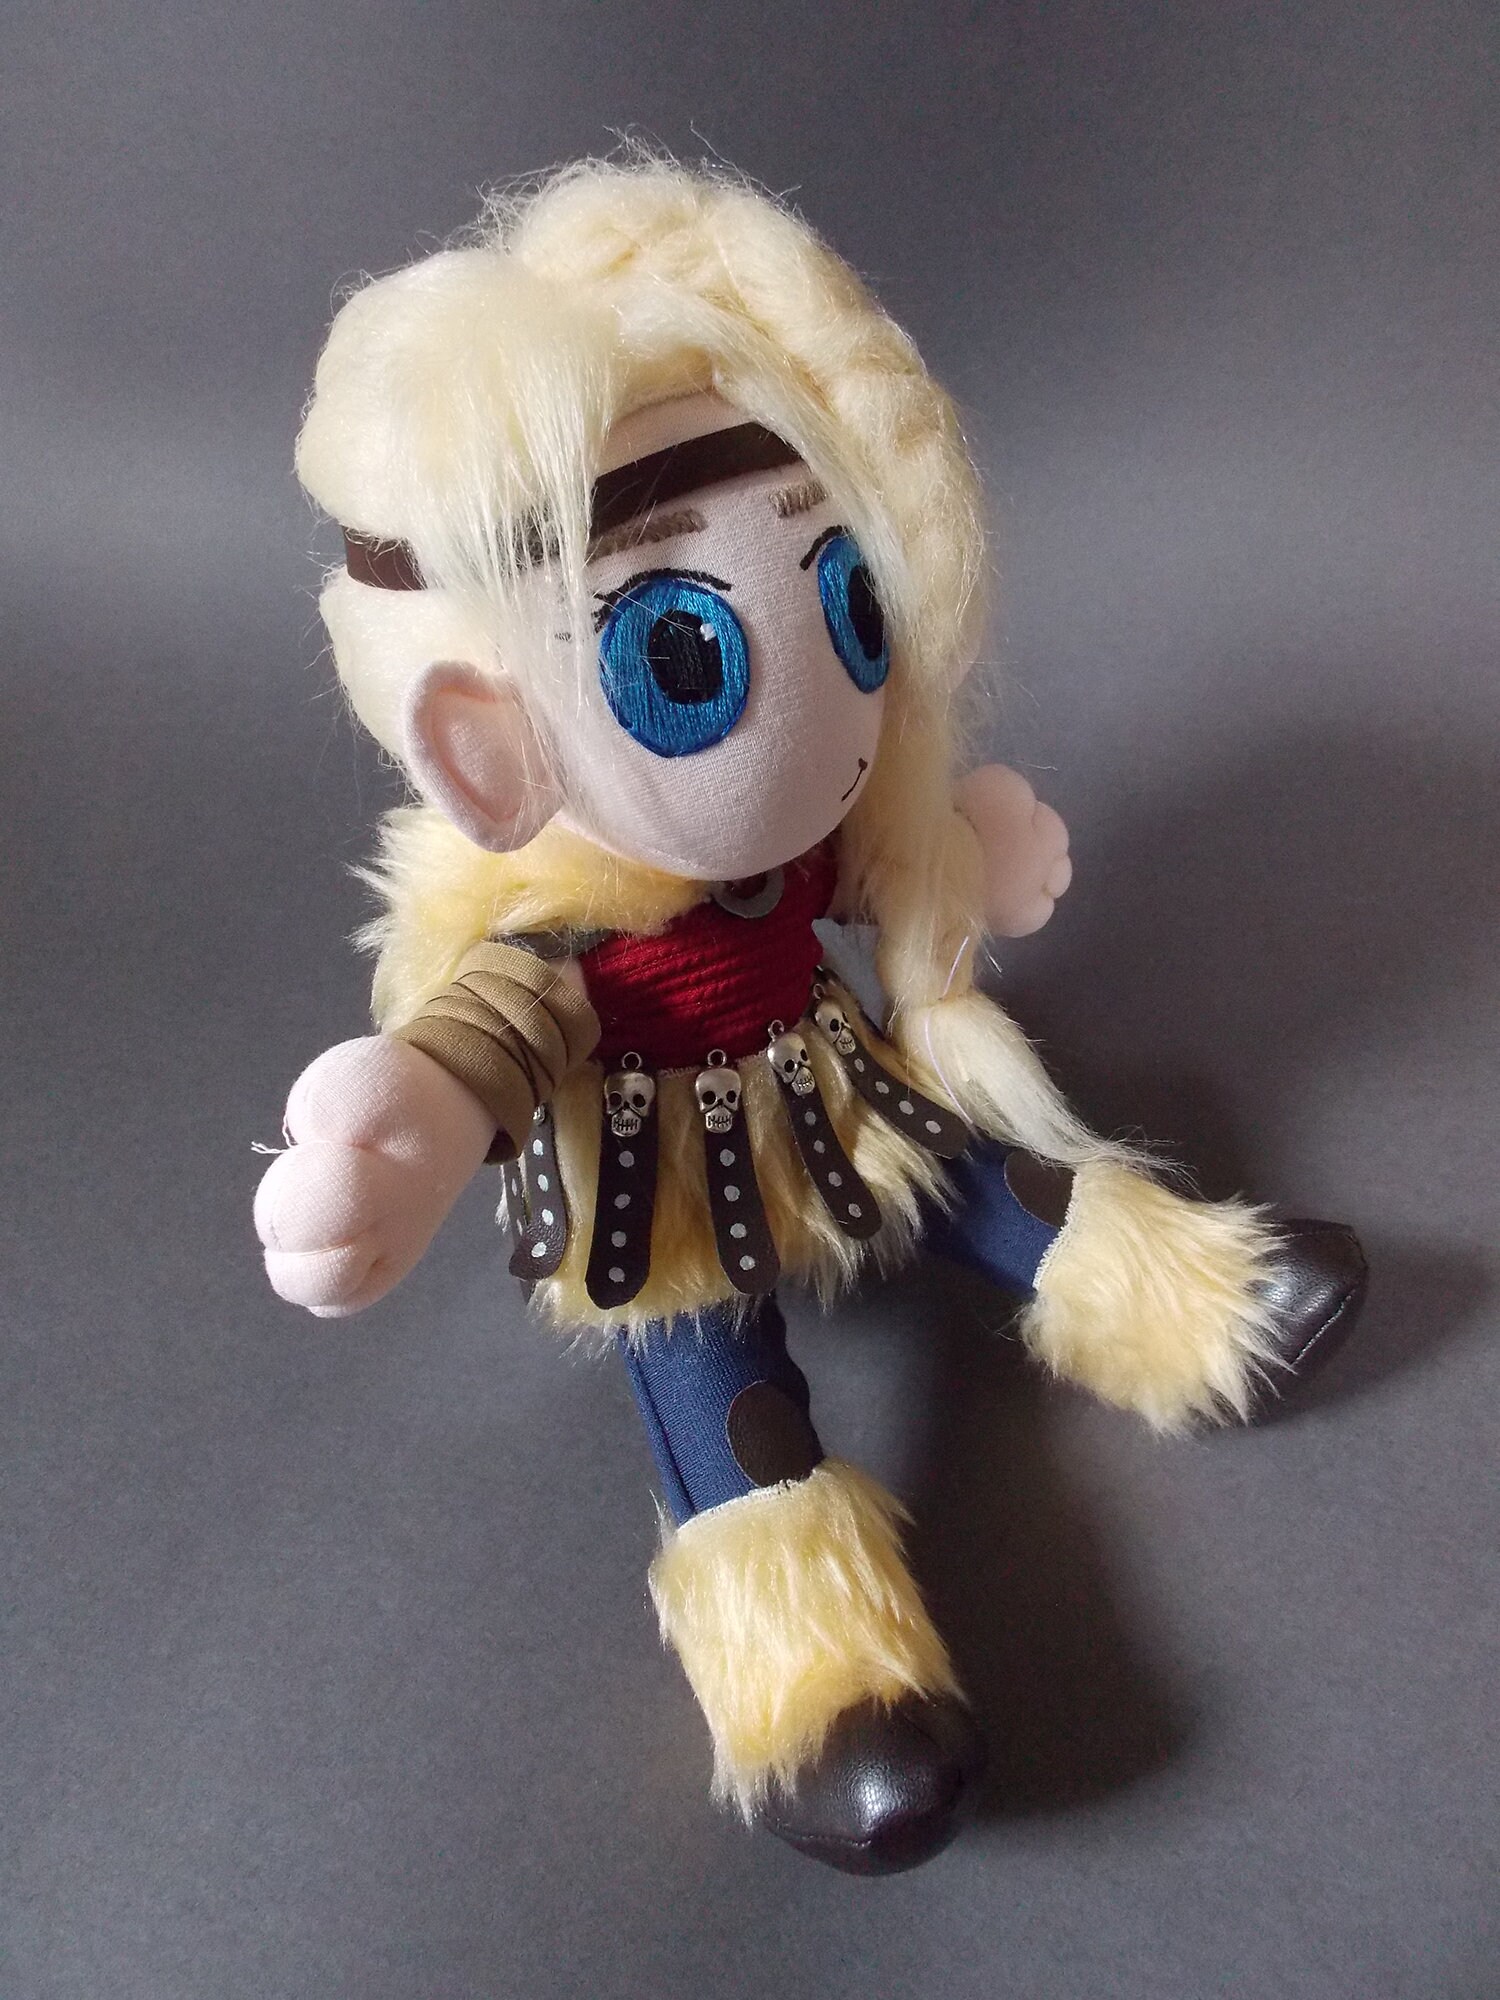 Astrid How to Train Your Dragon Doll Plushie Toy - Etsy